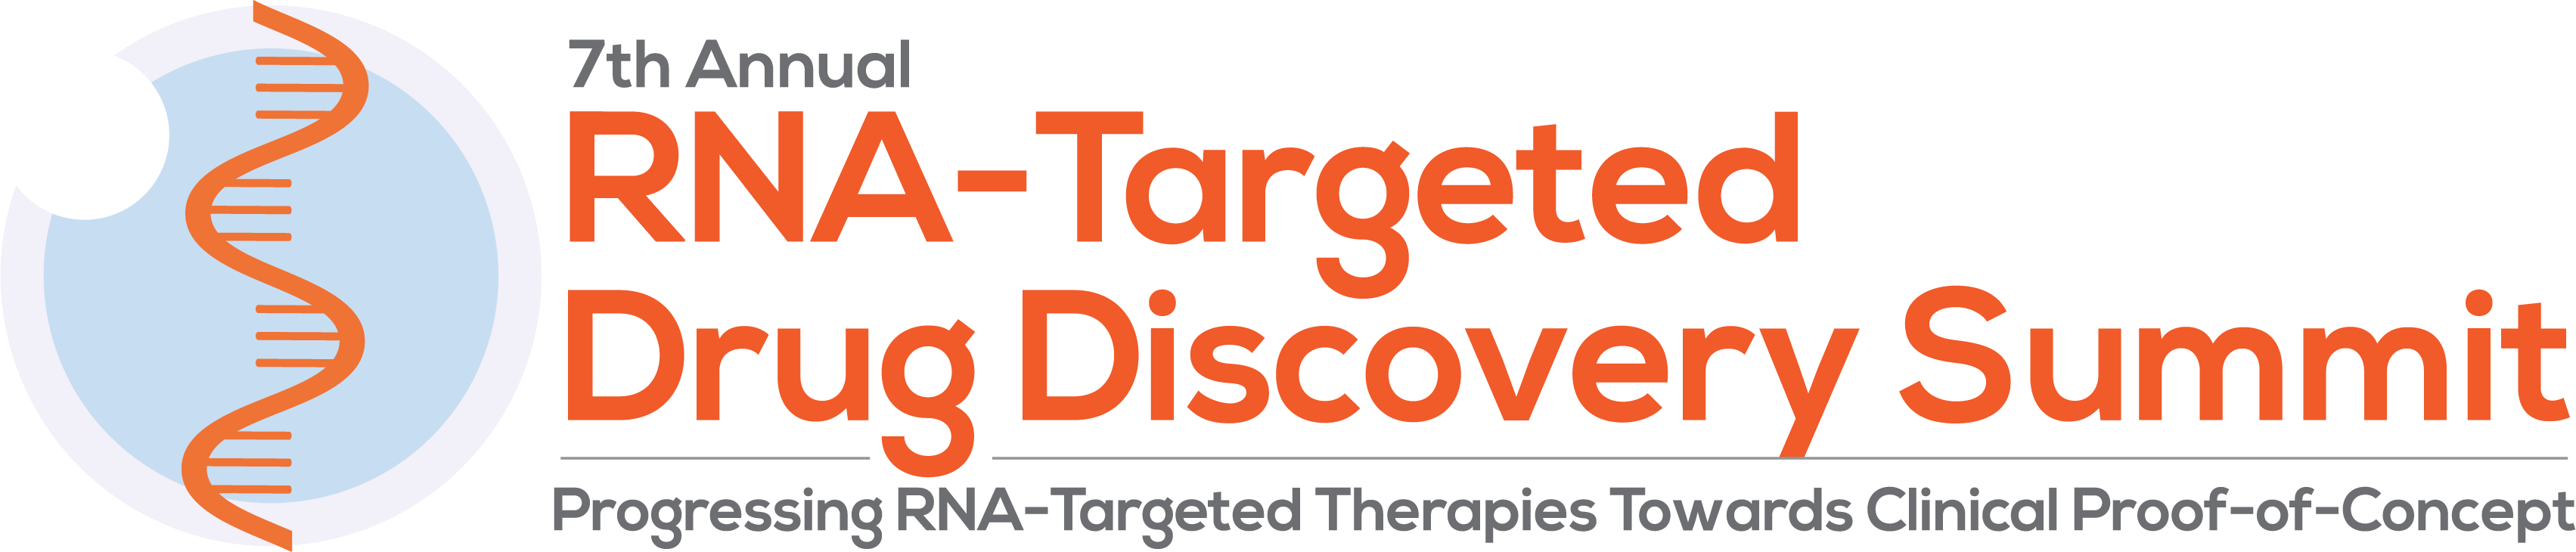 7th Annual RNA-Targeted Drug Discovery Summit STRAPLINE